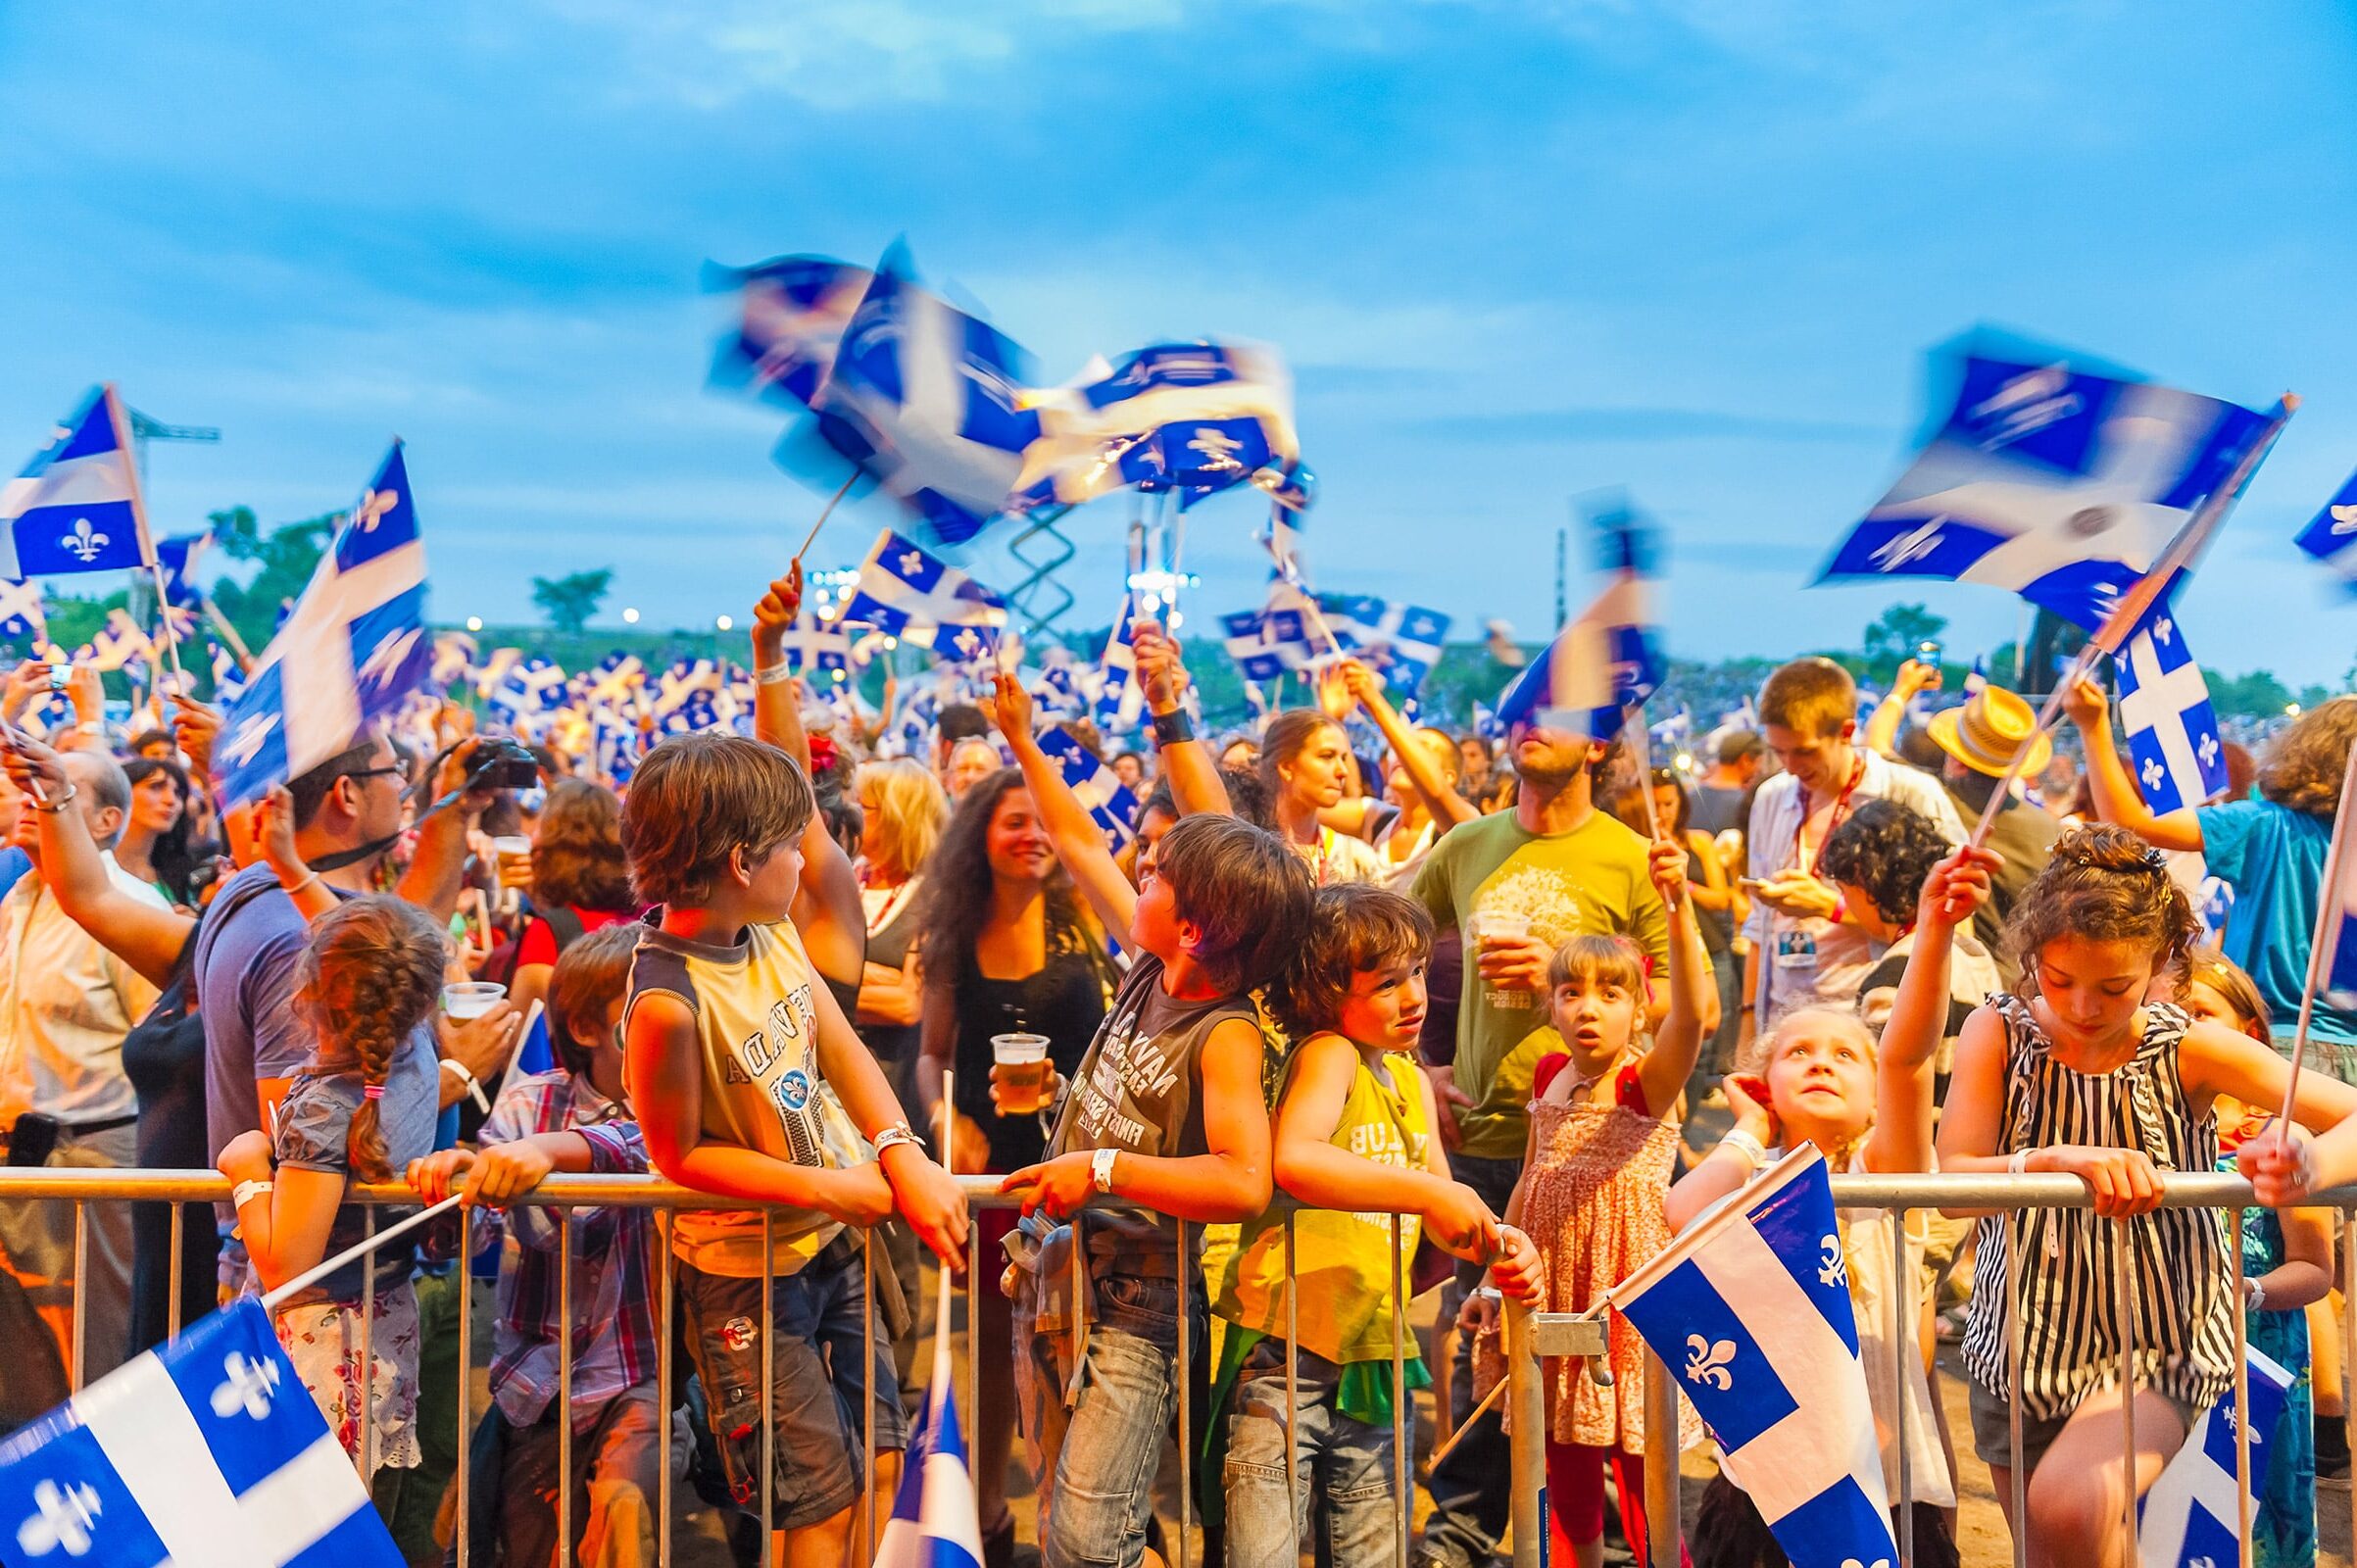 quebec festival with children and their parents waving flags